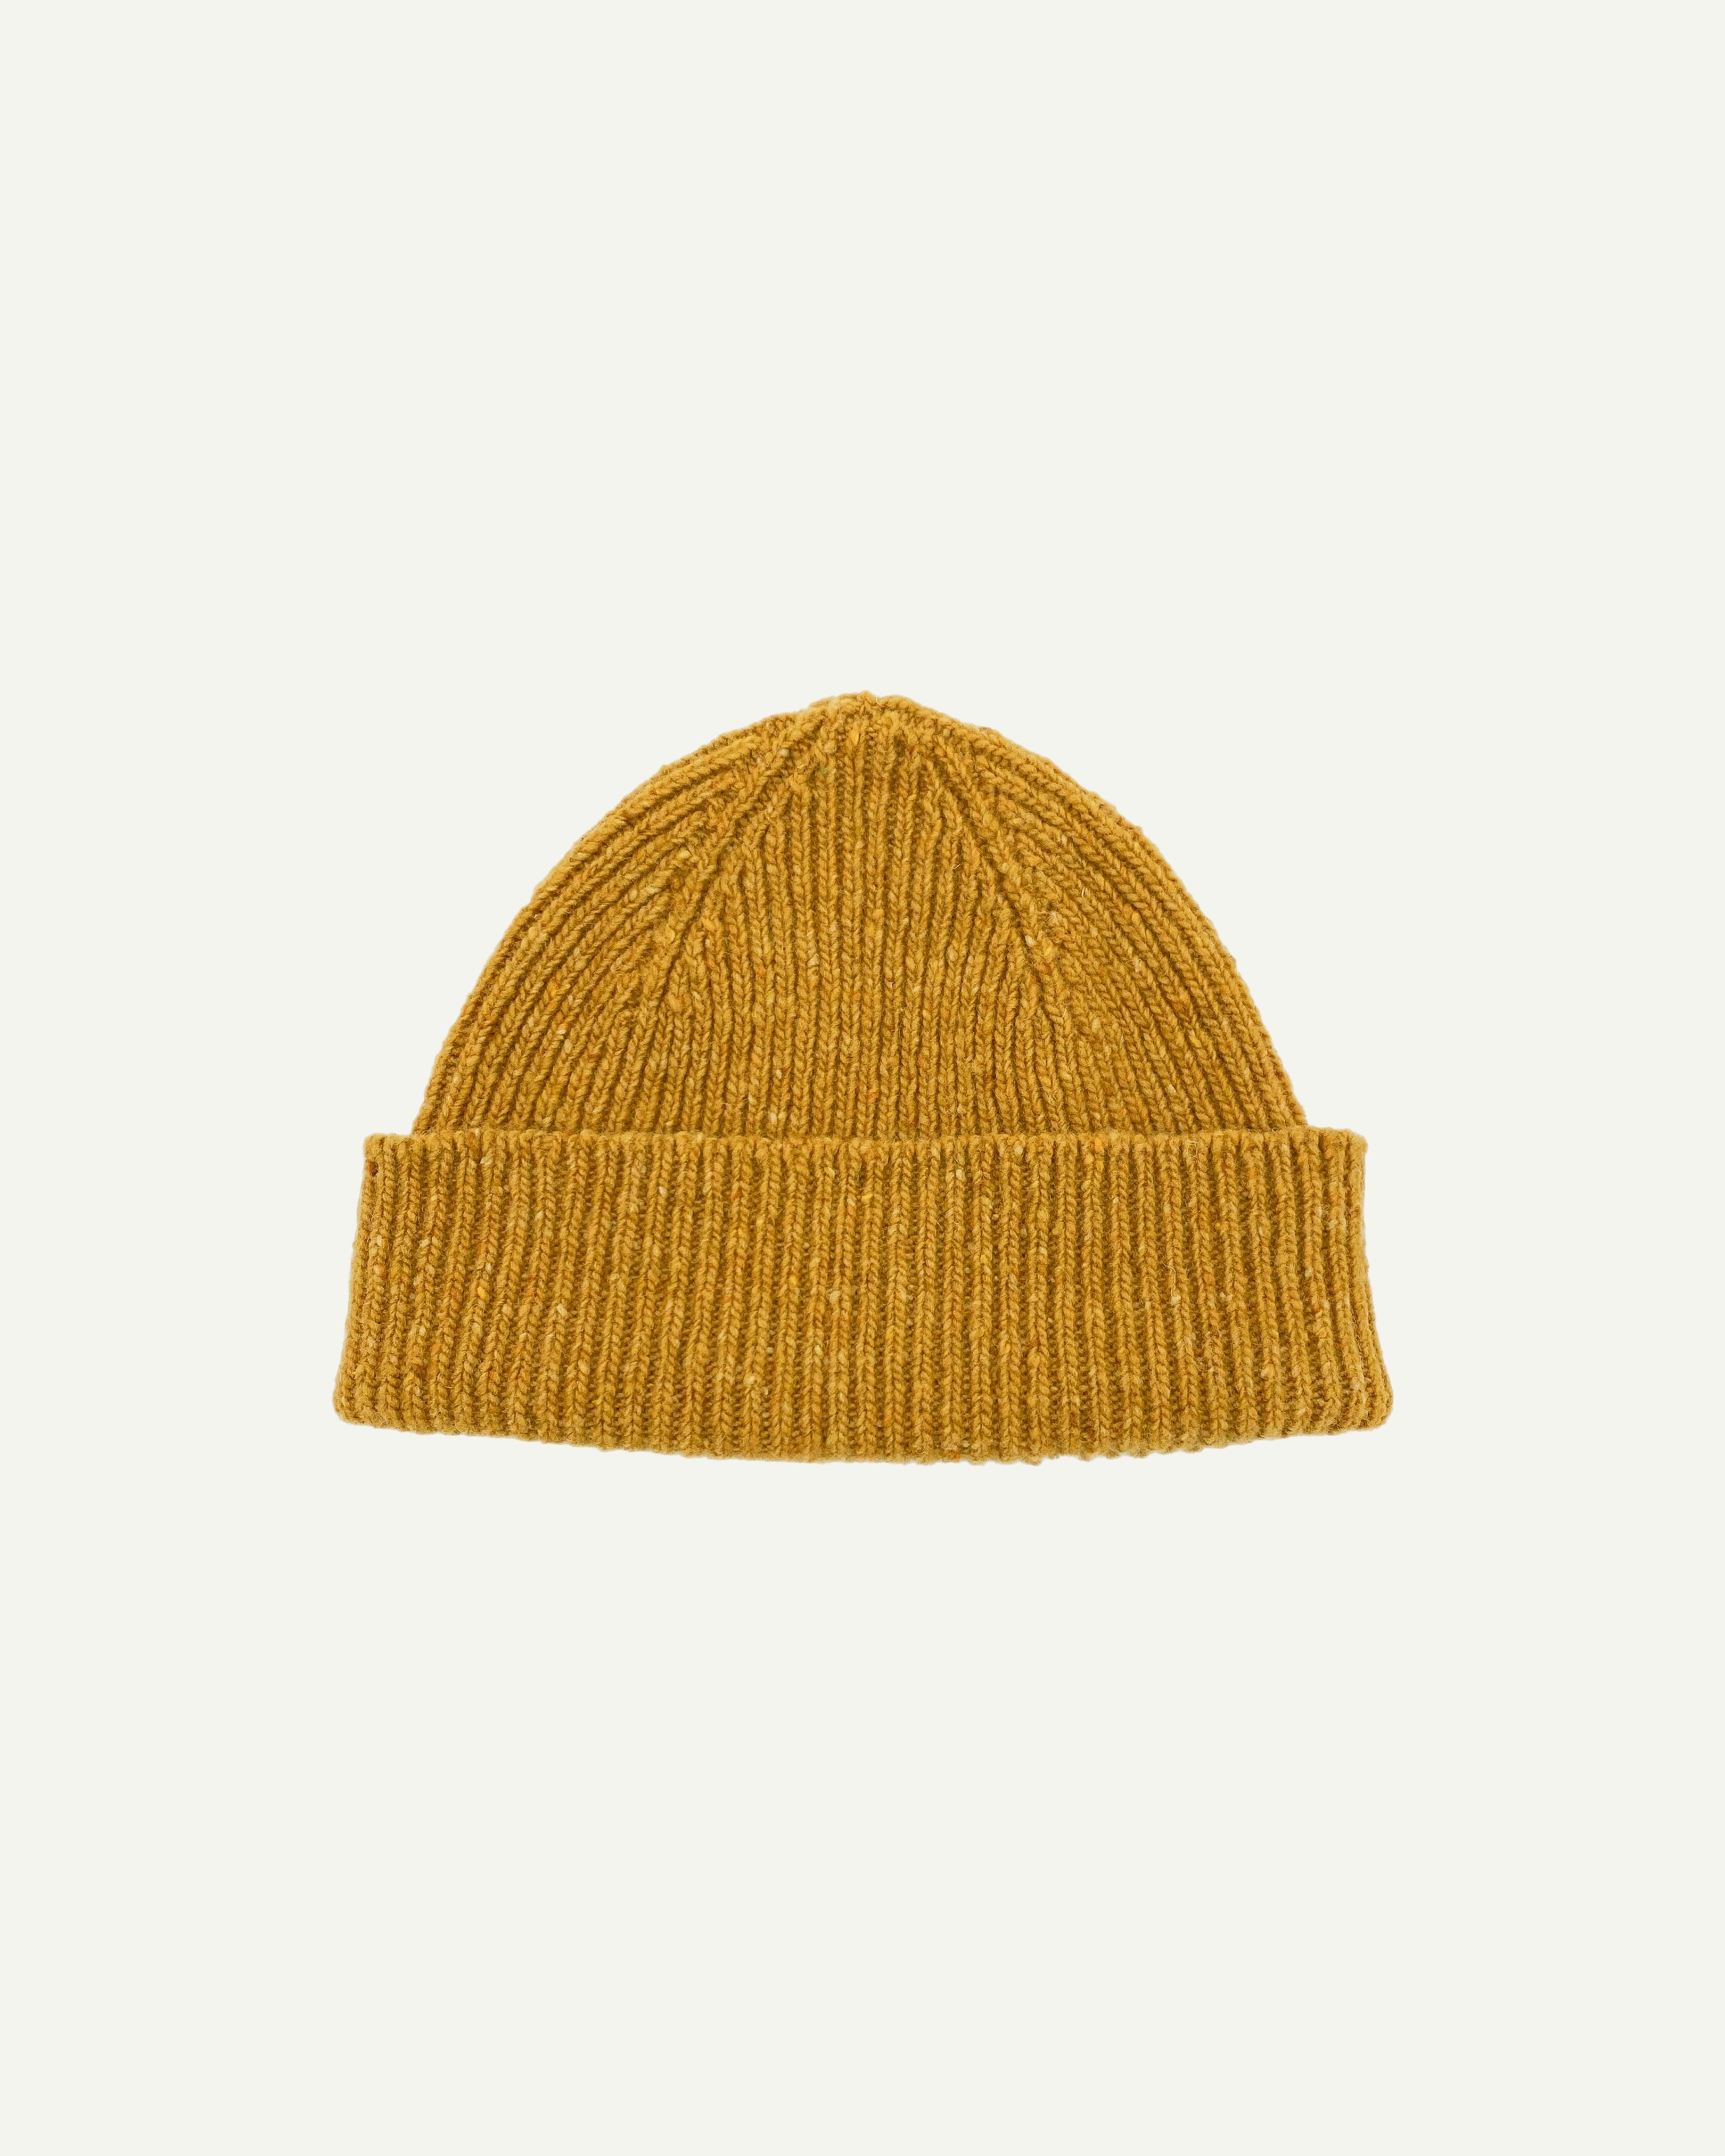  Flat view of Uskees 4003 donegal wool hat in yellow, with a clear view of the adjustable cuff.